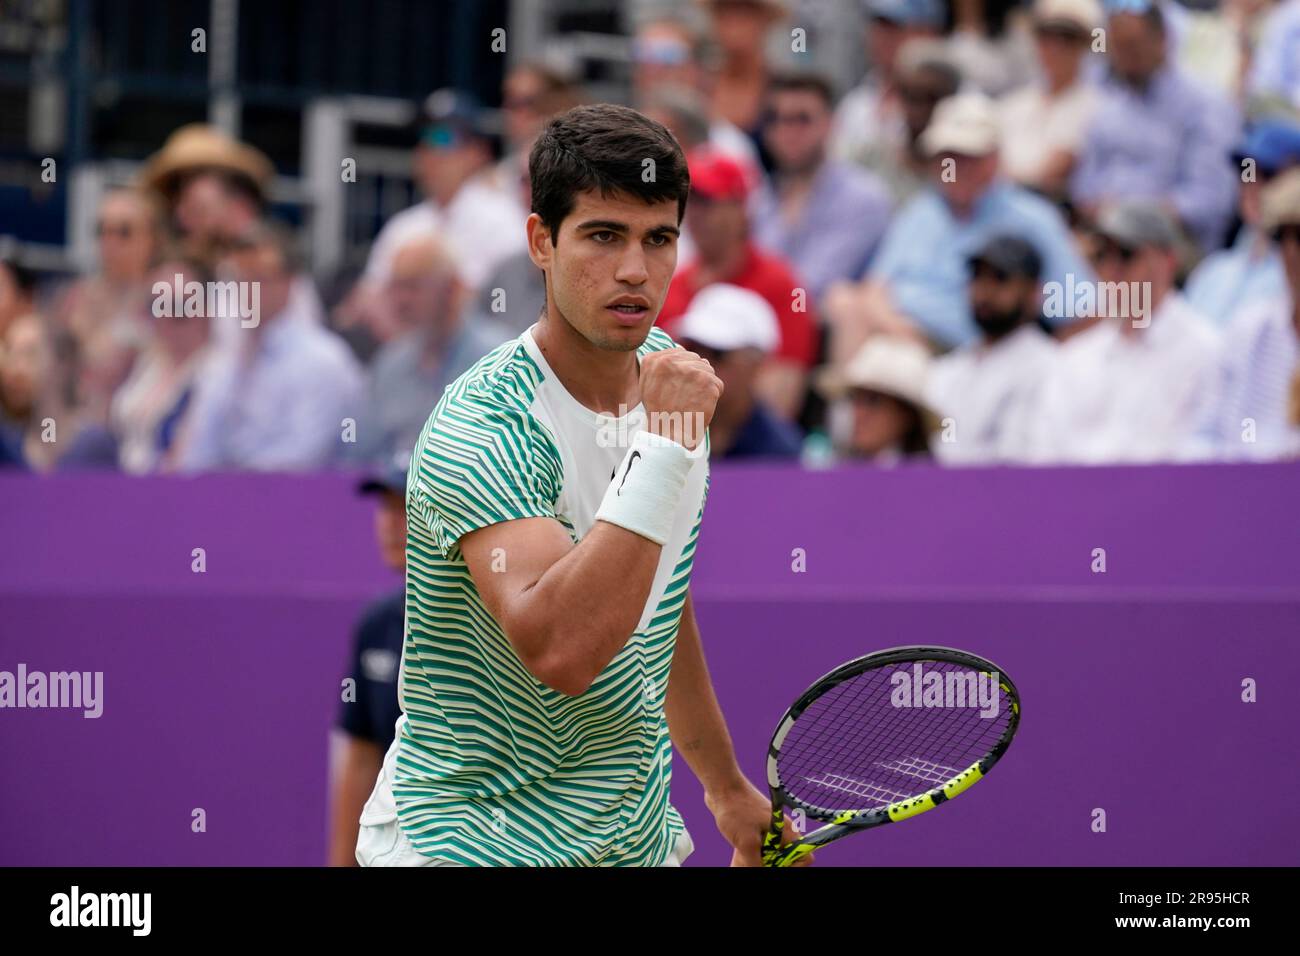 Carlos Alcaraz, of Spain, reacts after scoring a point against Sebastian Korda, of the US, during their mens singles semifinal match at the Queens Club tennis tournament in London, Saturday, June 24,